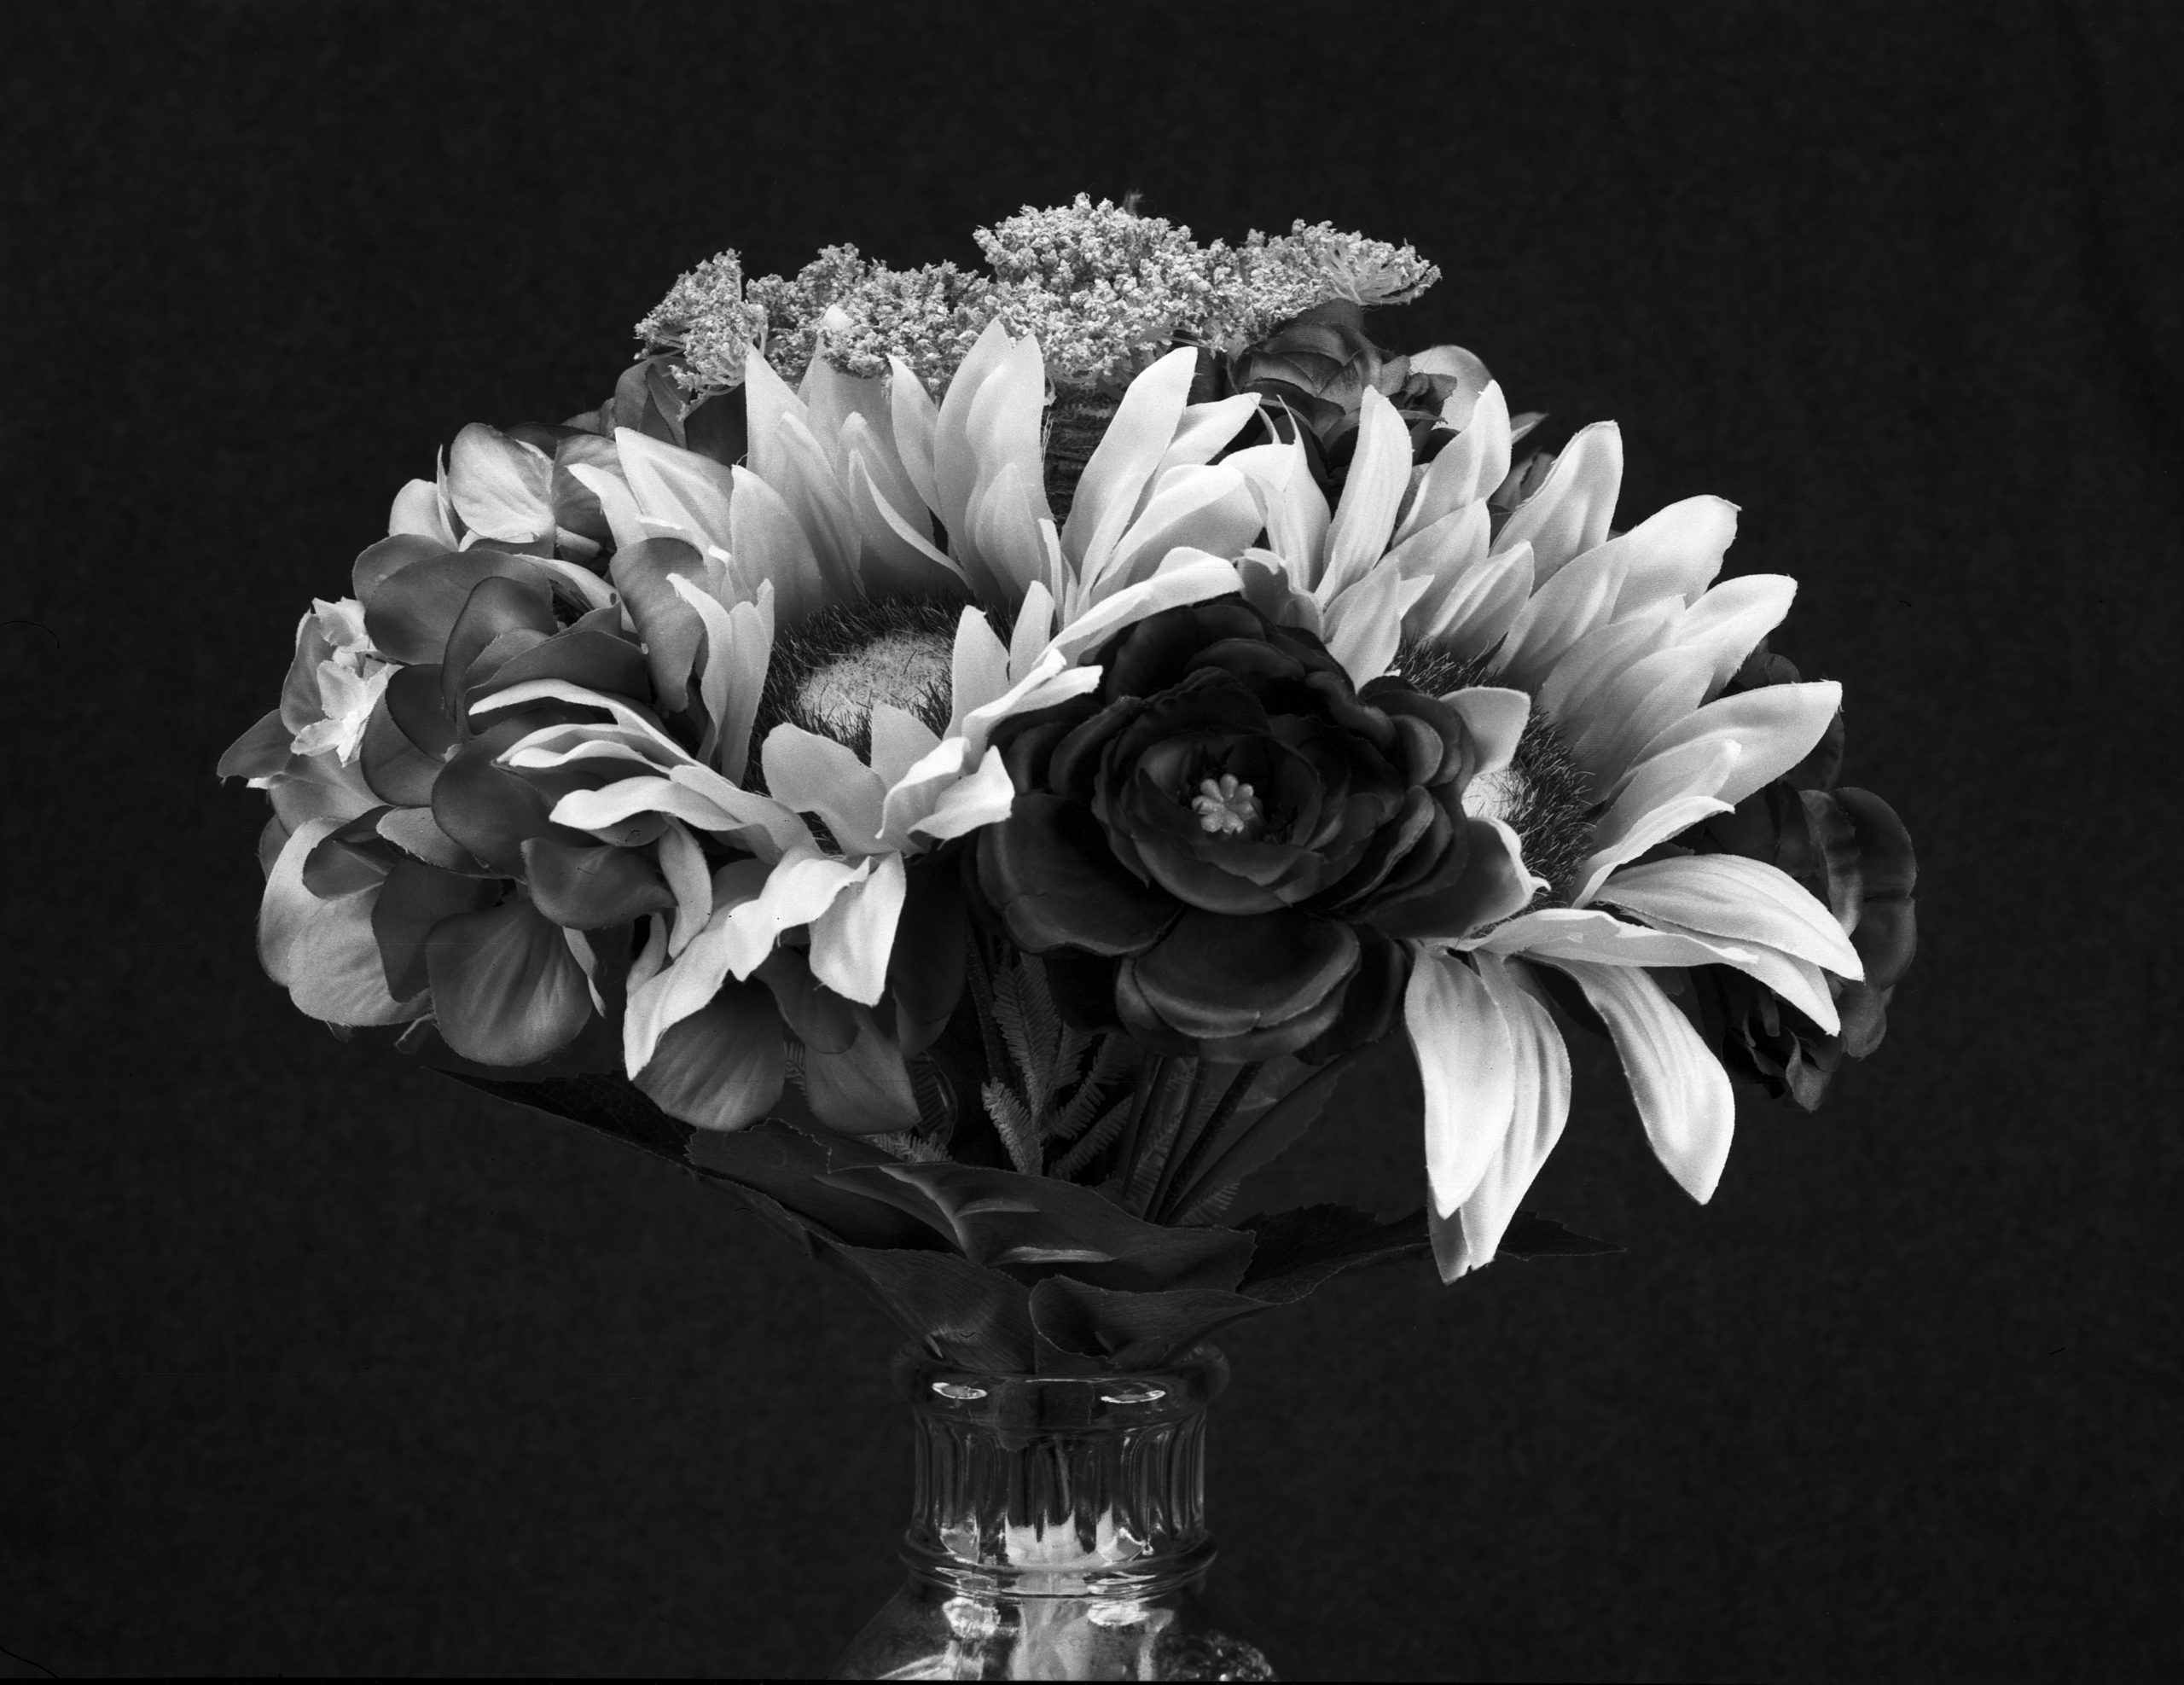 Flowers in a vase in black and white. Captured on film!